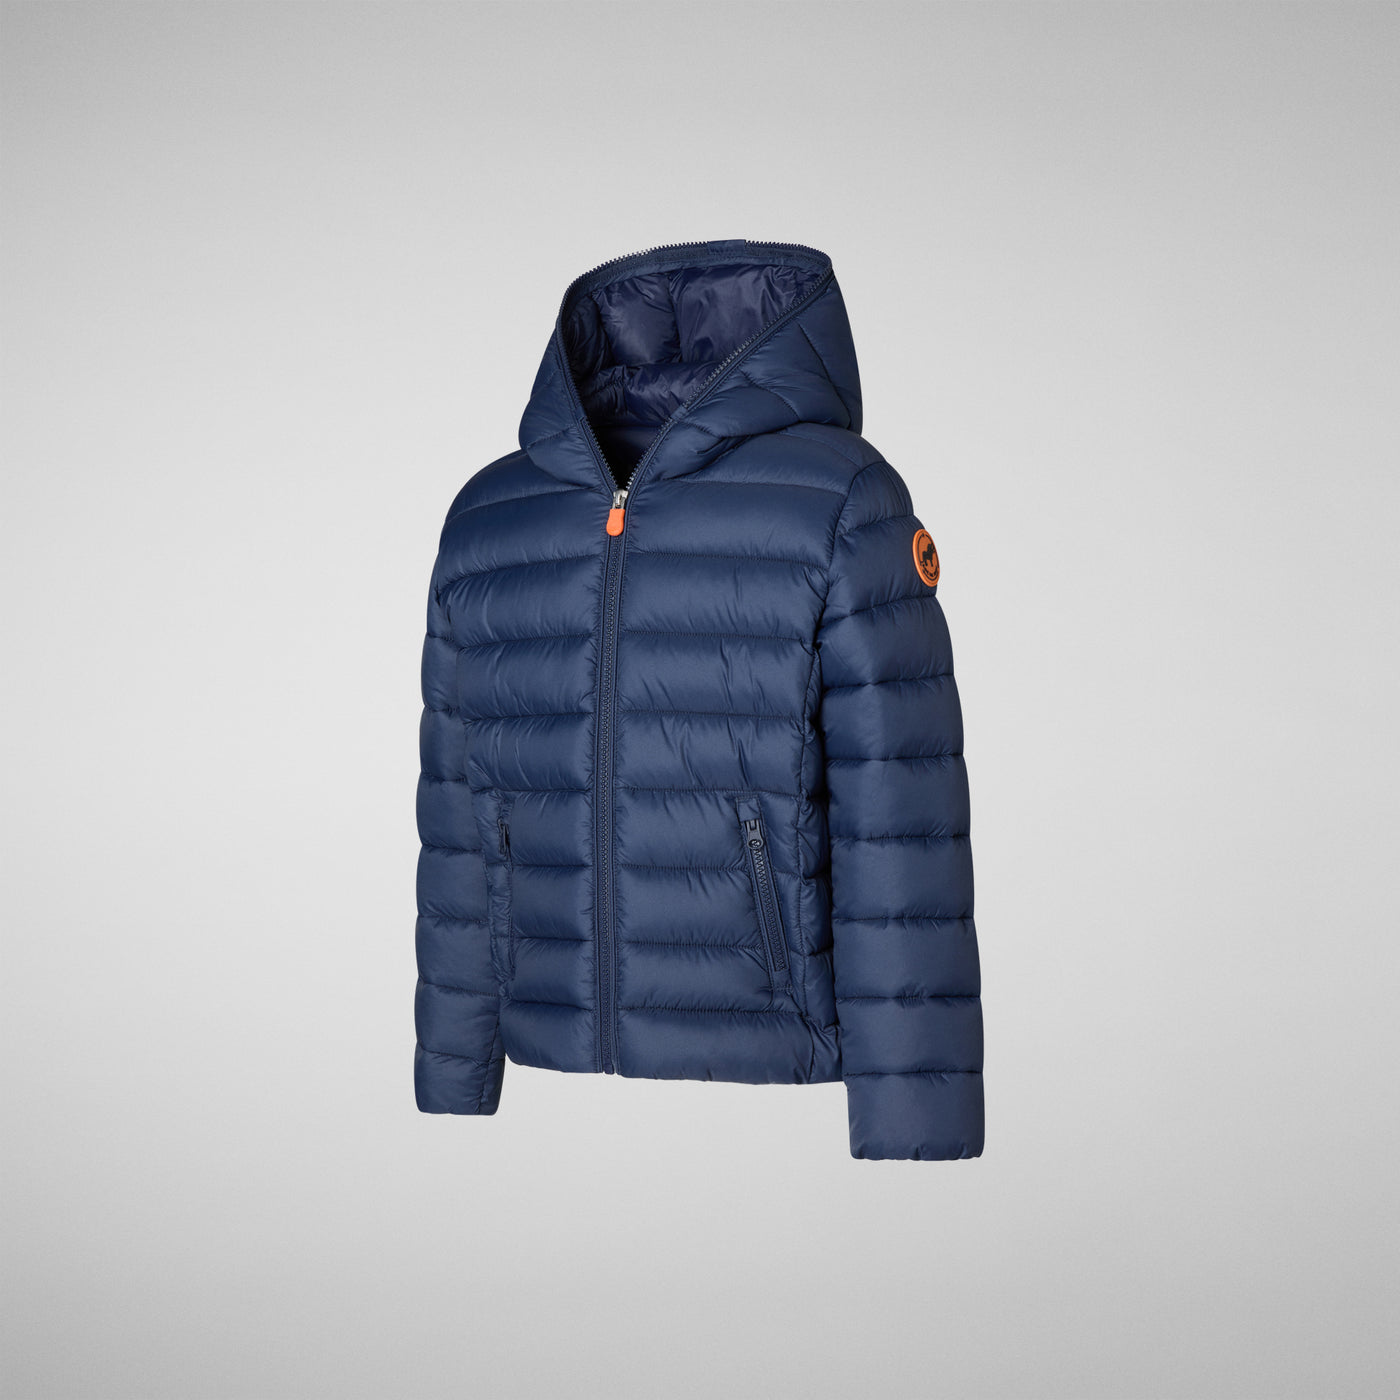 Side View of Kids' Jackson Hooded Puffer Jacket in Navy Blue